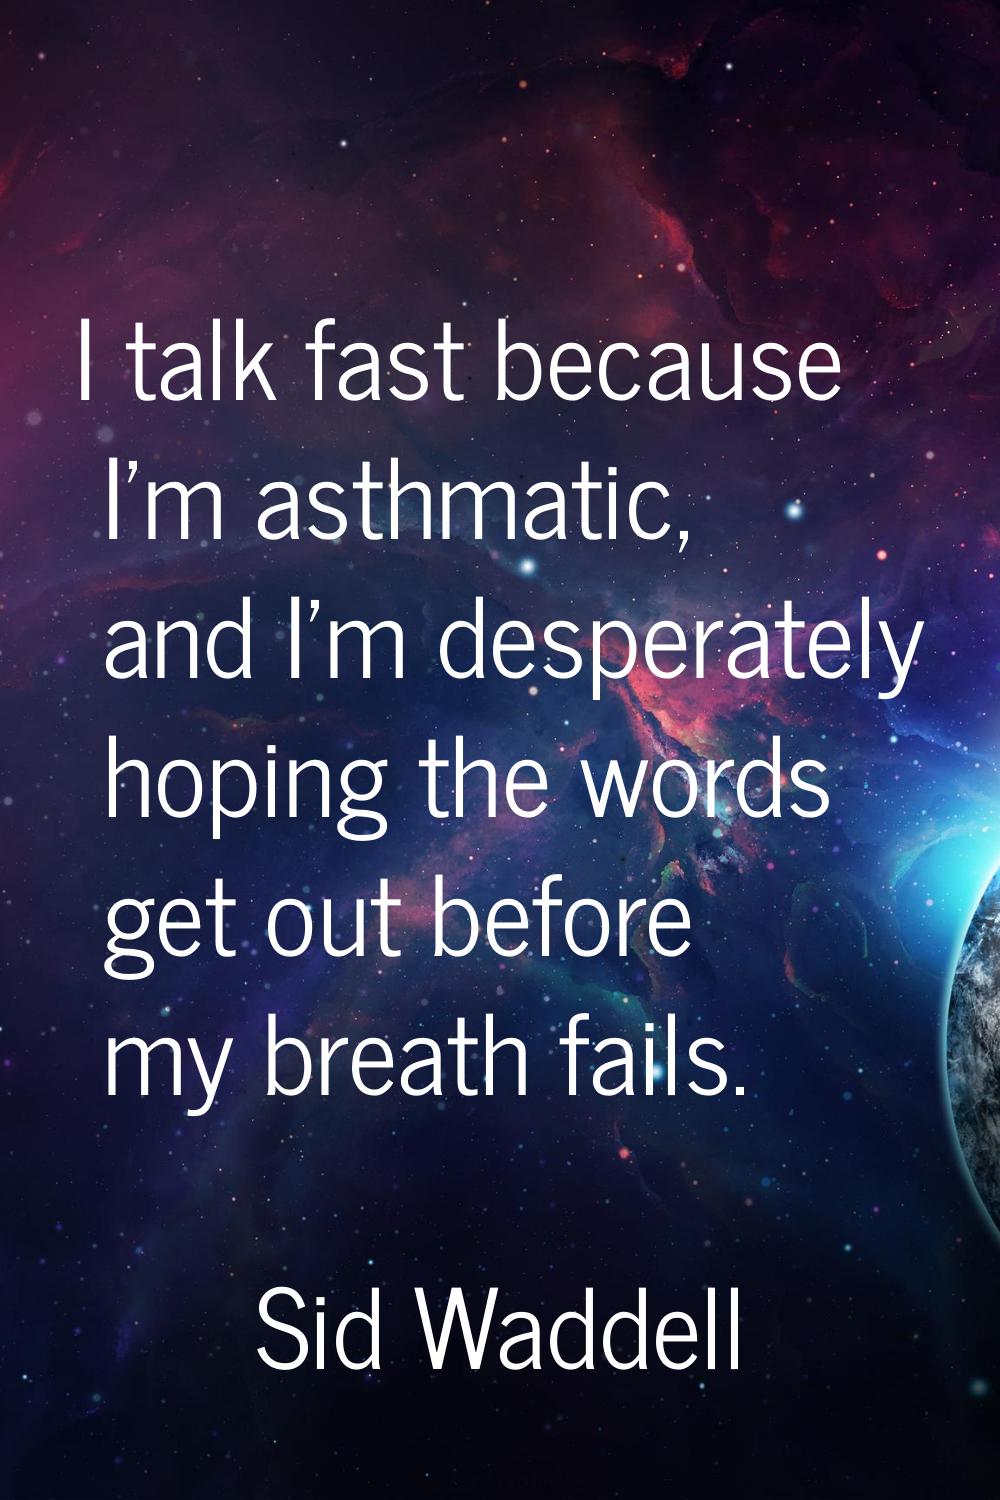 I talk fast because I'm asthmatic, and I'm desperately hoping the words get out before my breath fa